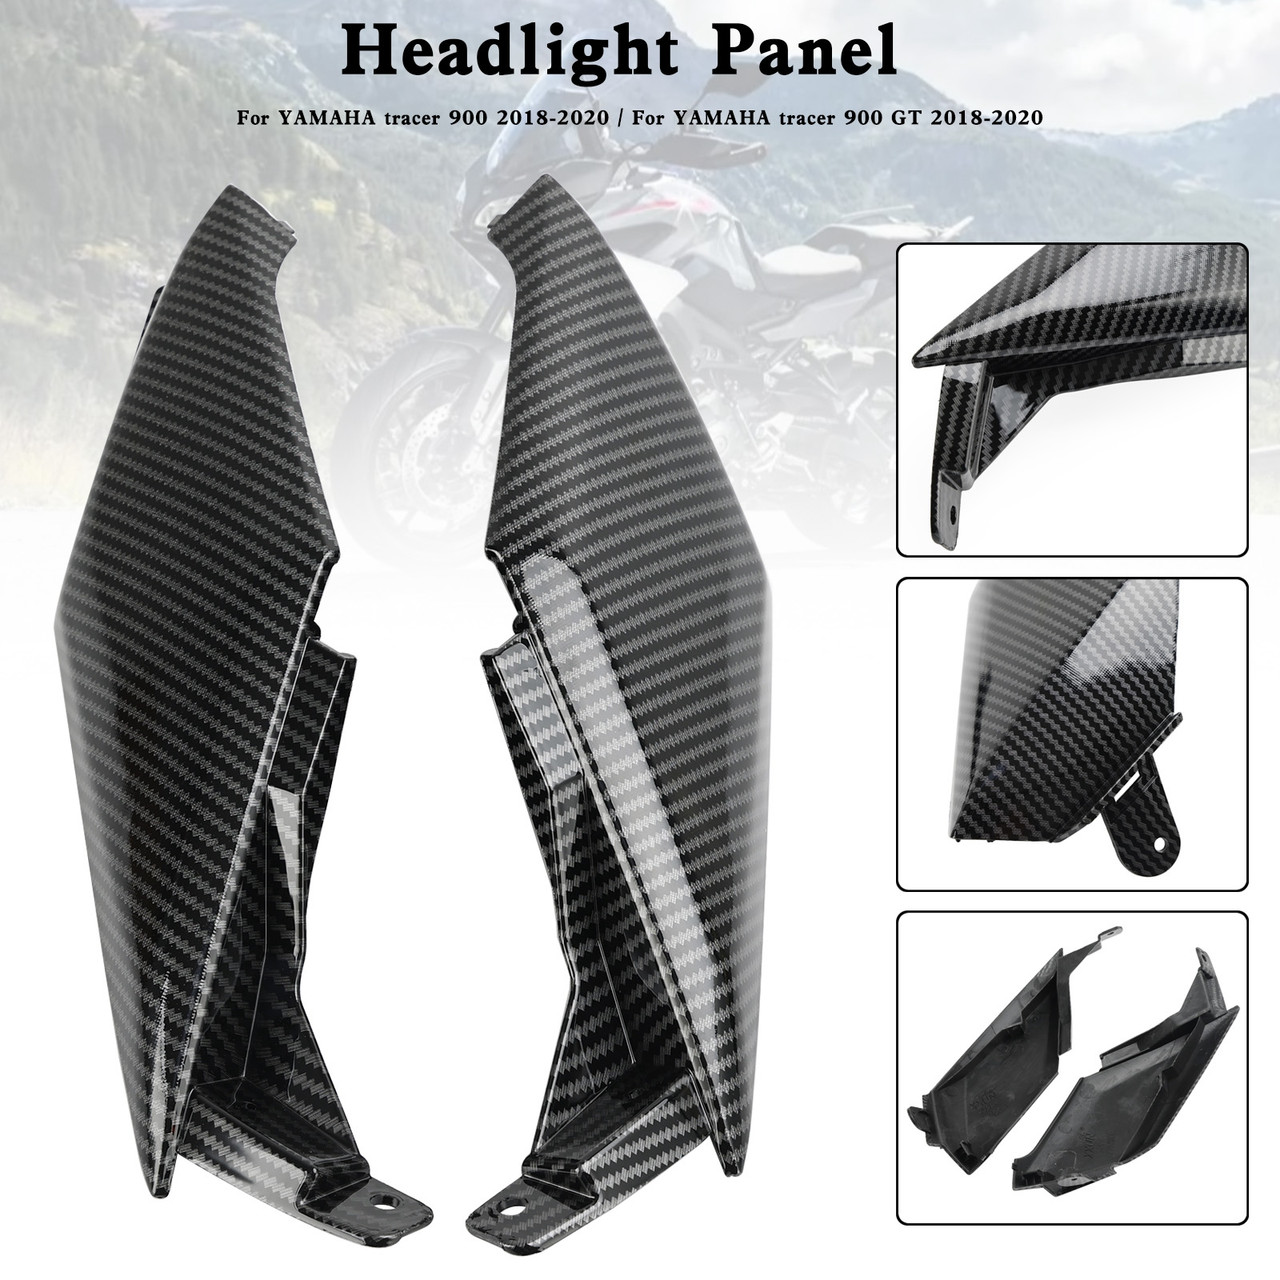 Carbon Cover Headlight Panel Fairing For Yamaha Tracer 900 / GT 2018-2020